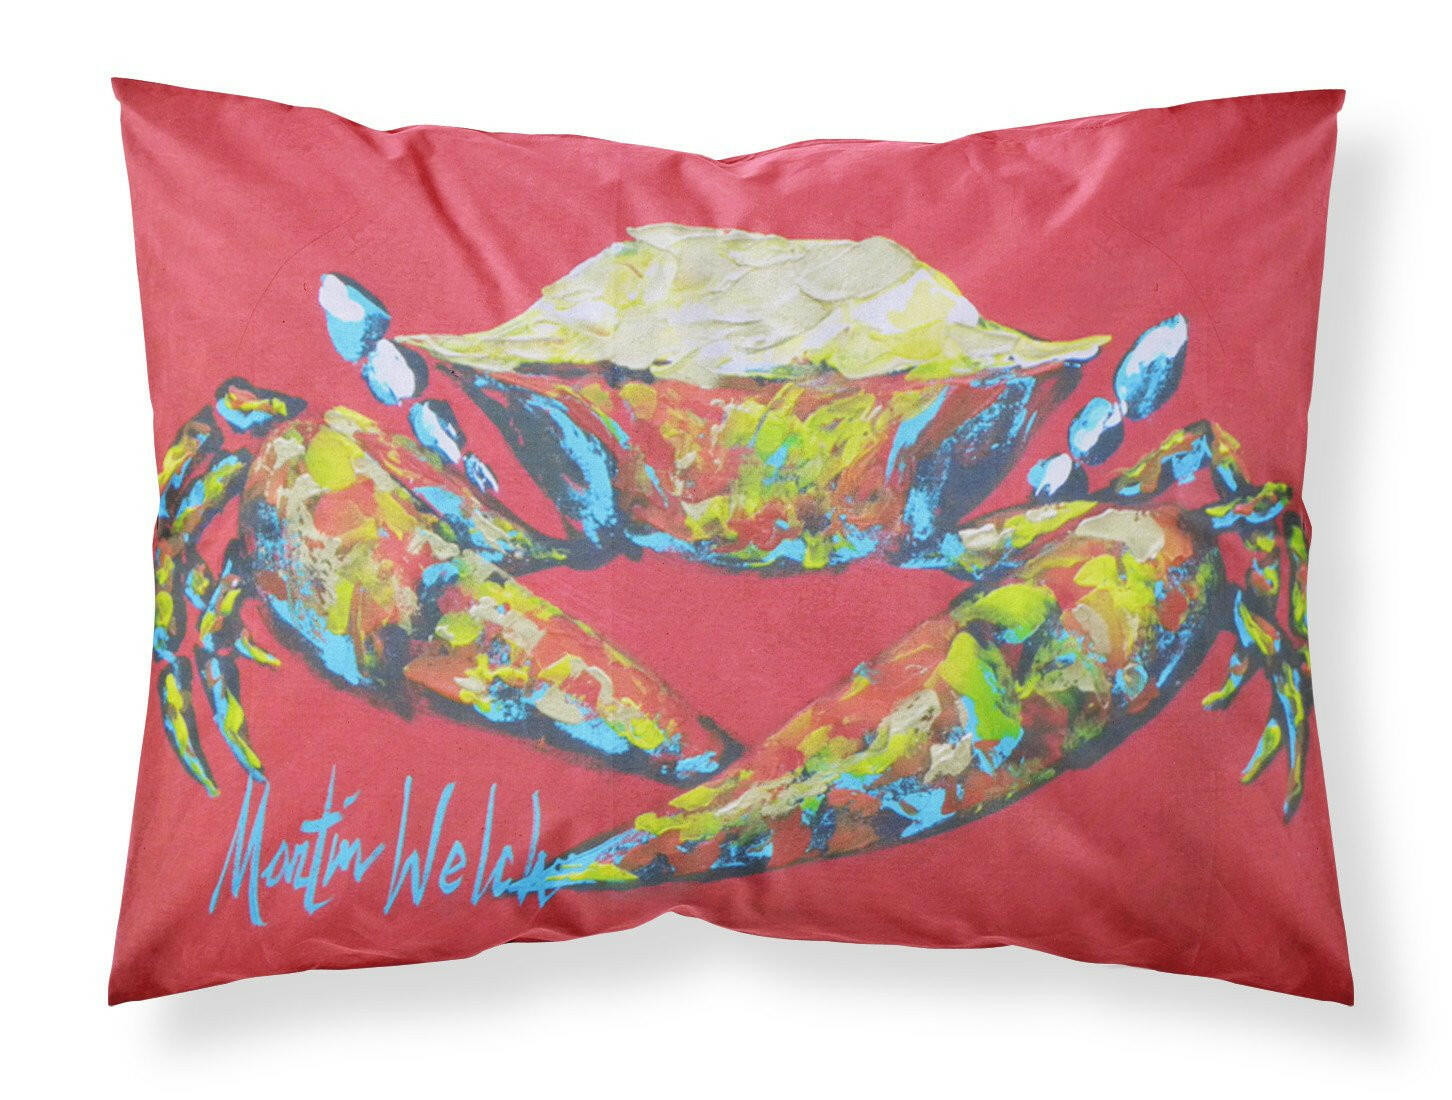 Crab Seafood One Moisture wicking Fabric standard pillowcase by Caroline's Treasures